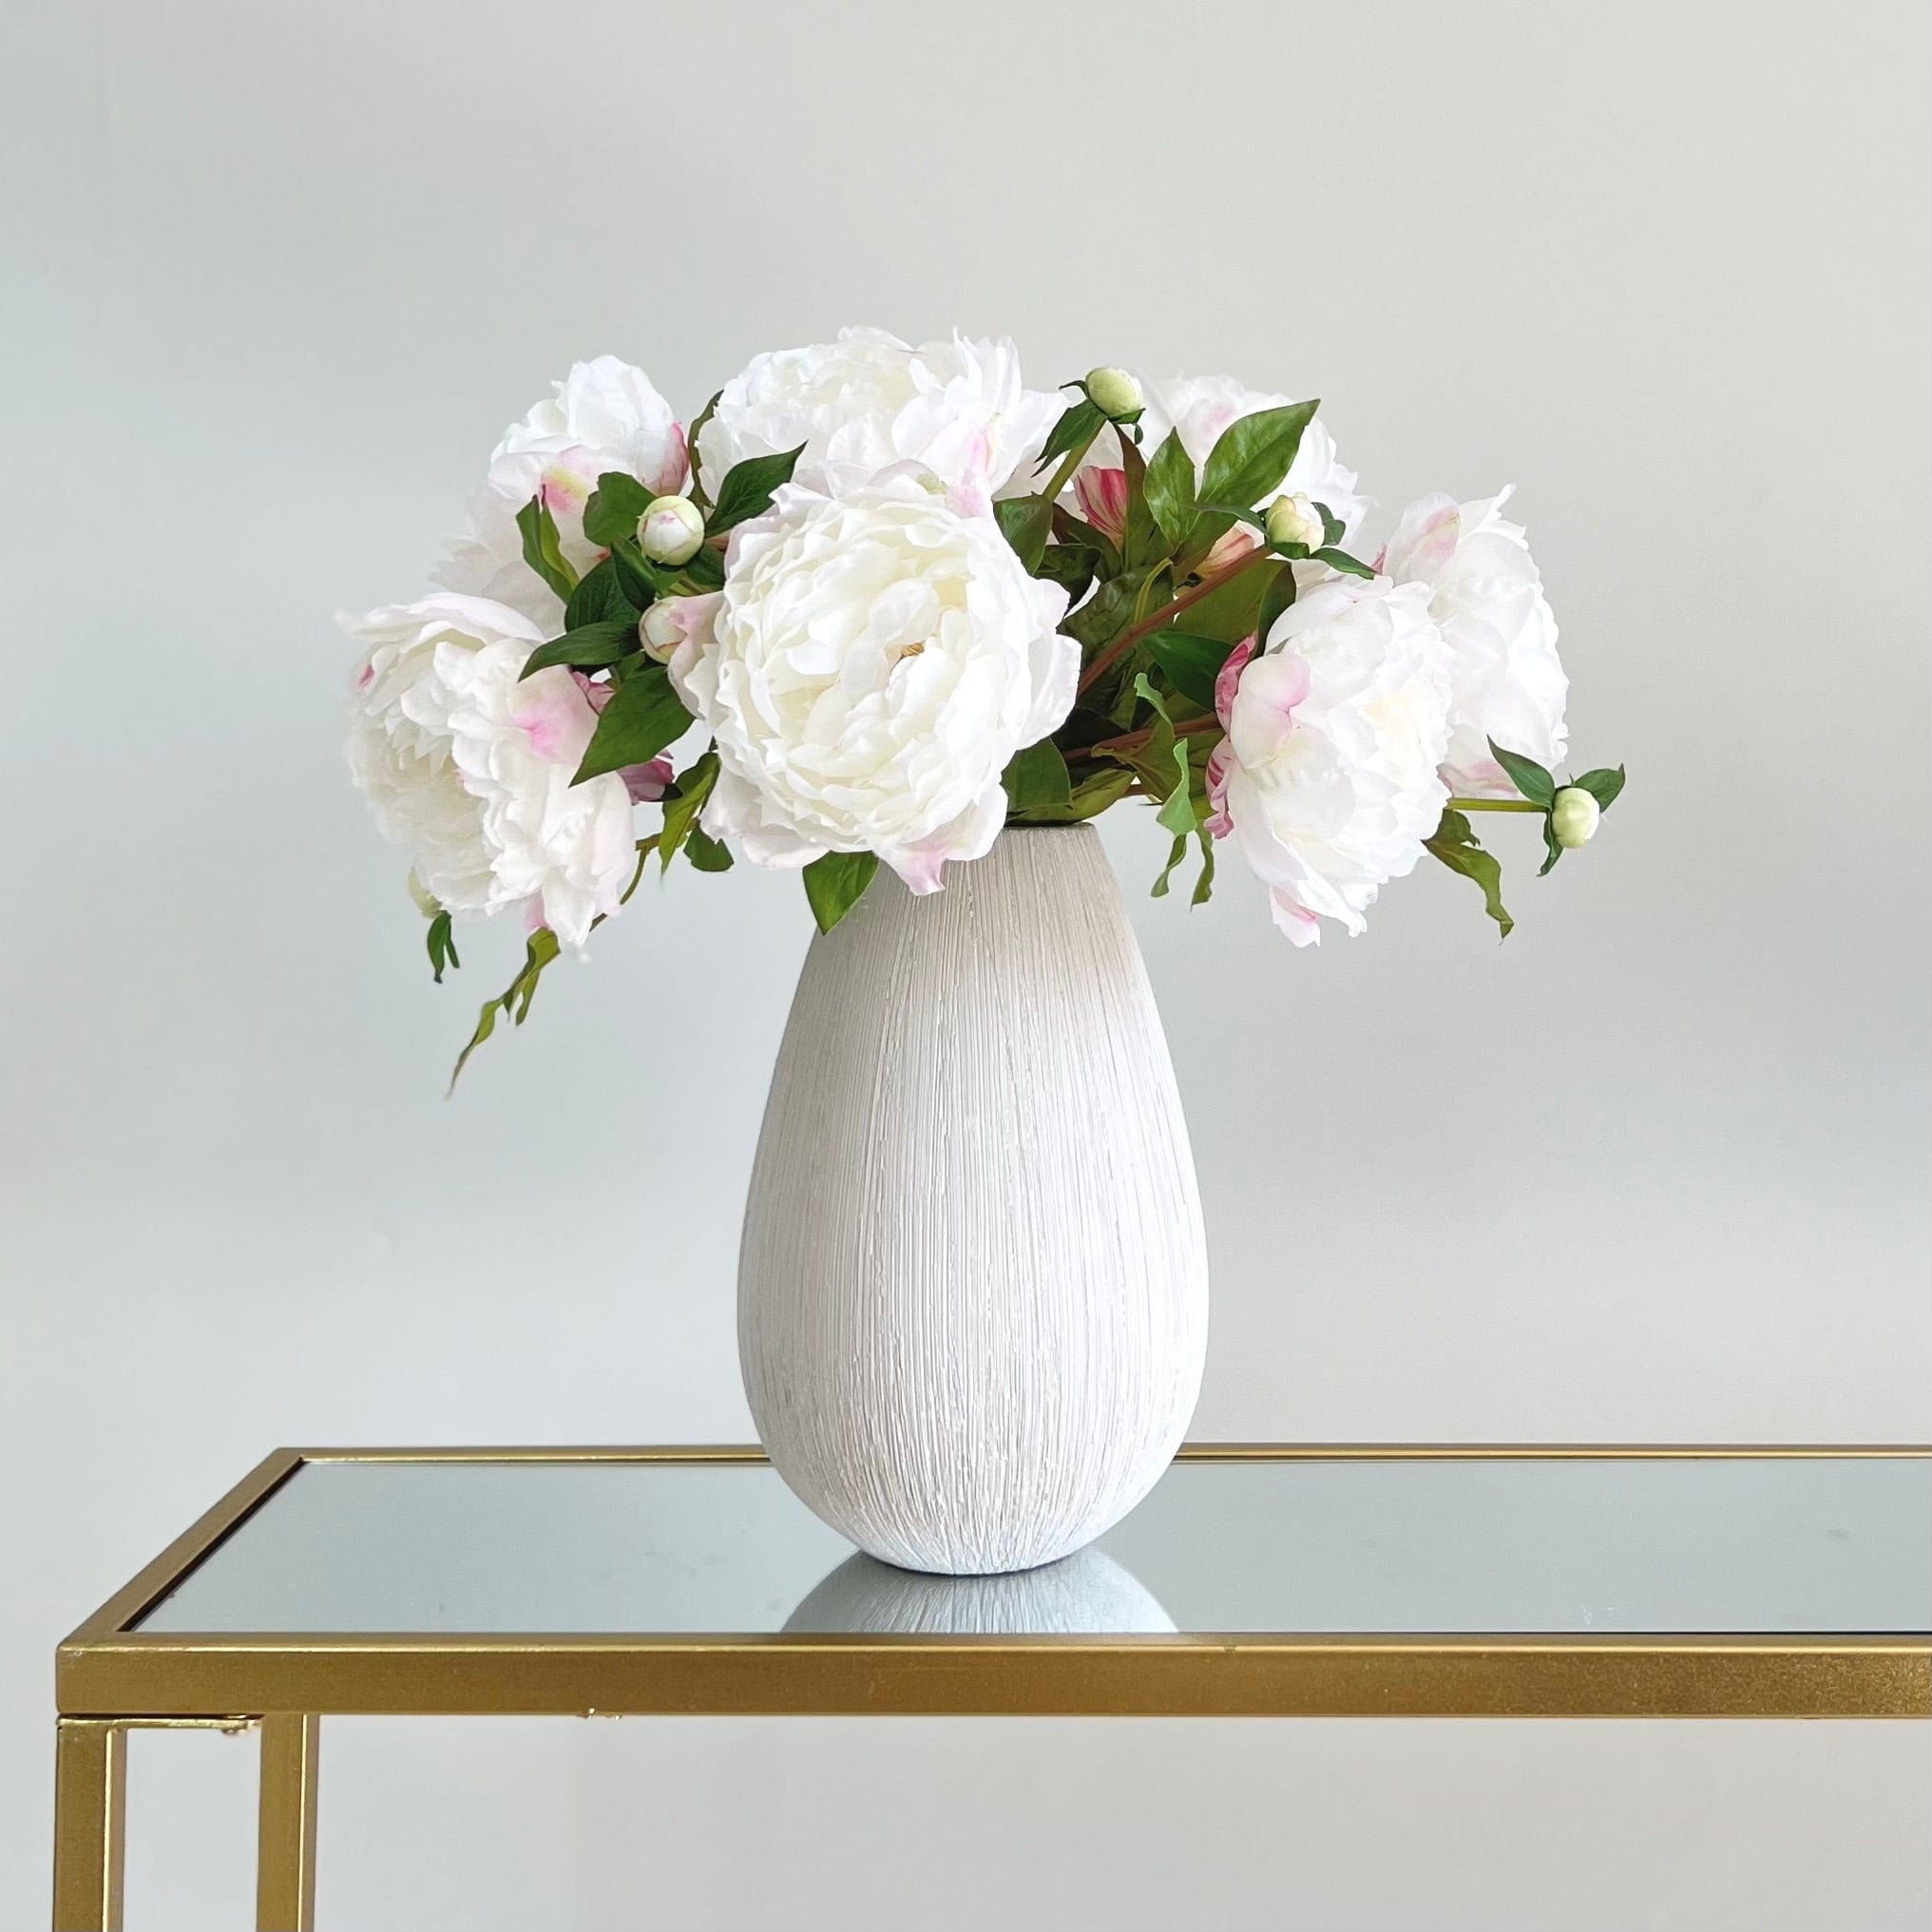 Artificial flowers luxury faux silk white classic peony bibury vase lifelike realistic faux flowers ABP1513 ABY6043WH